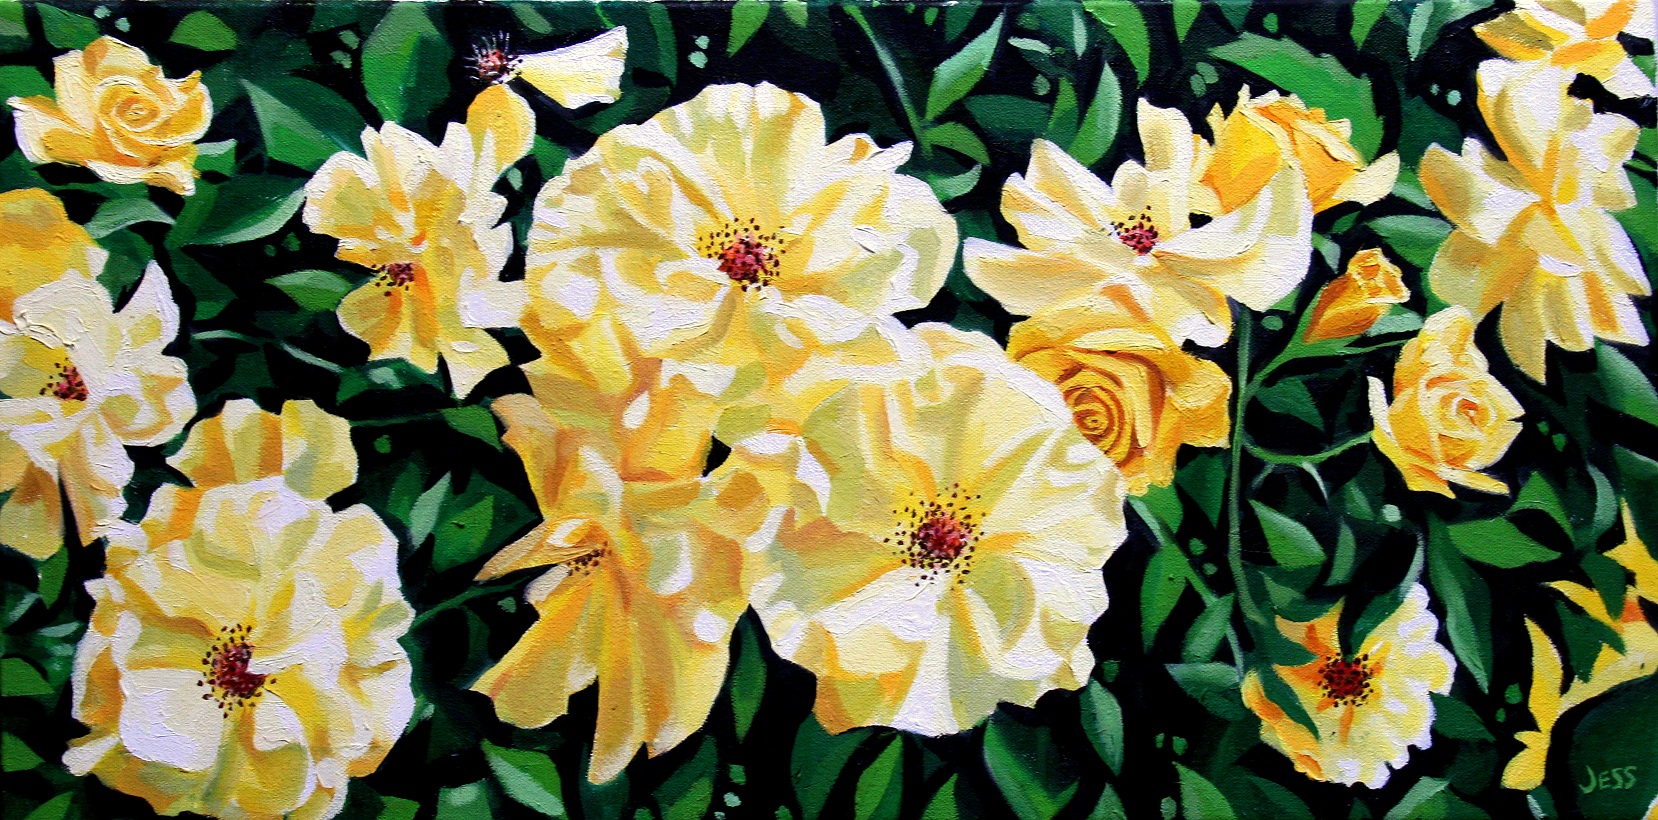 Yellow Roses, oil on canvas, 12 x 24 in, Jessica Siemens 2013